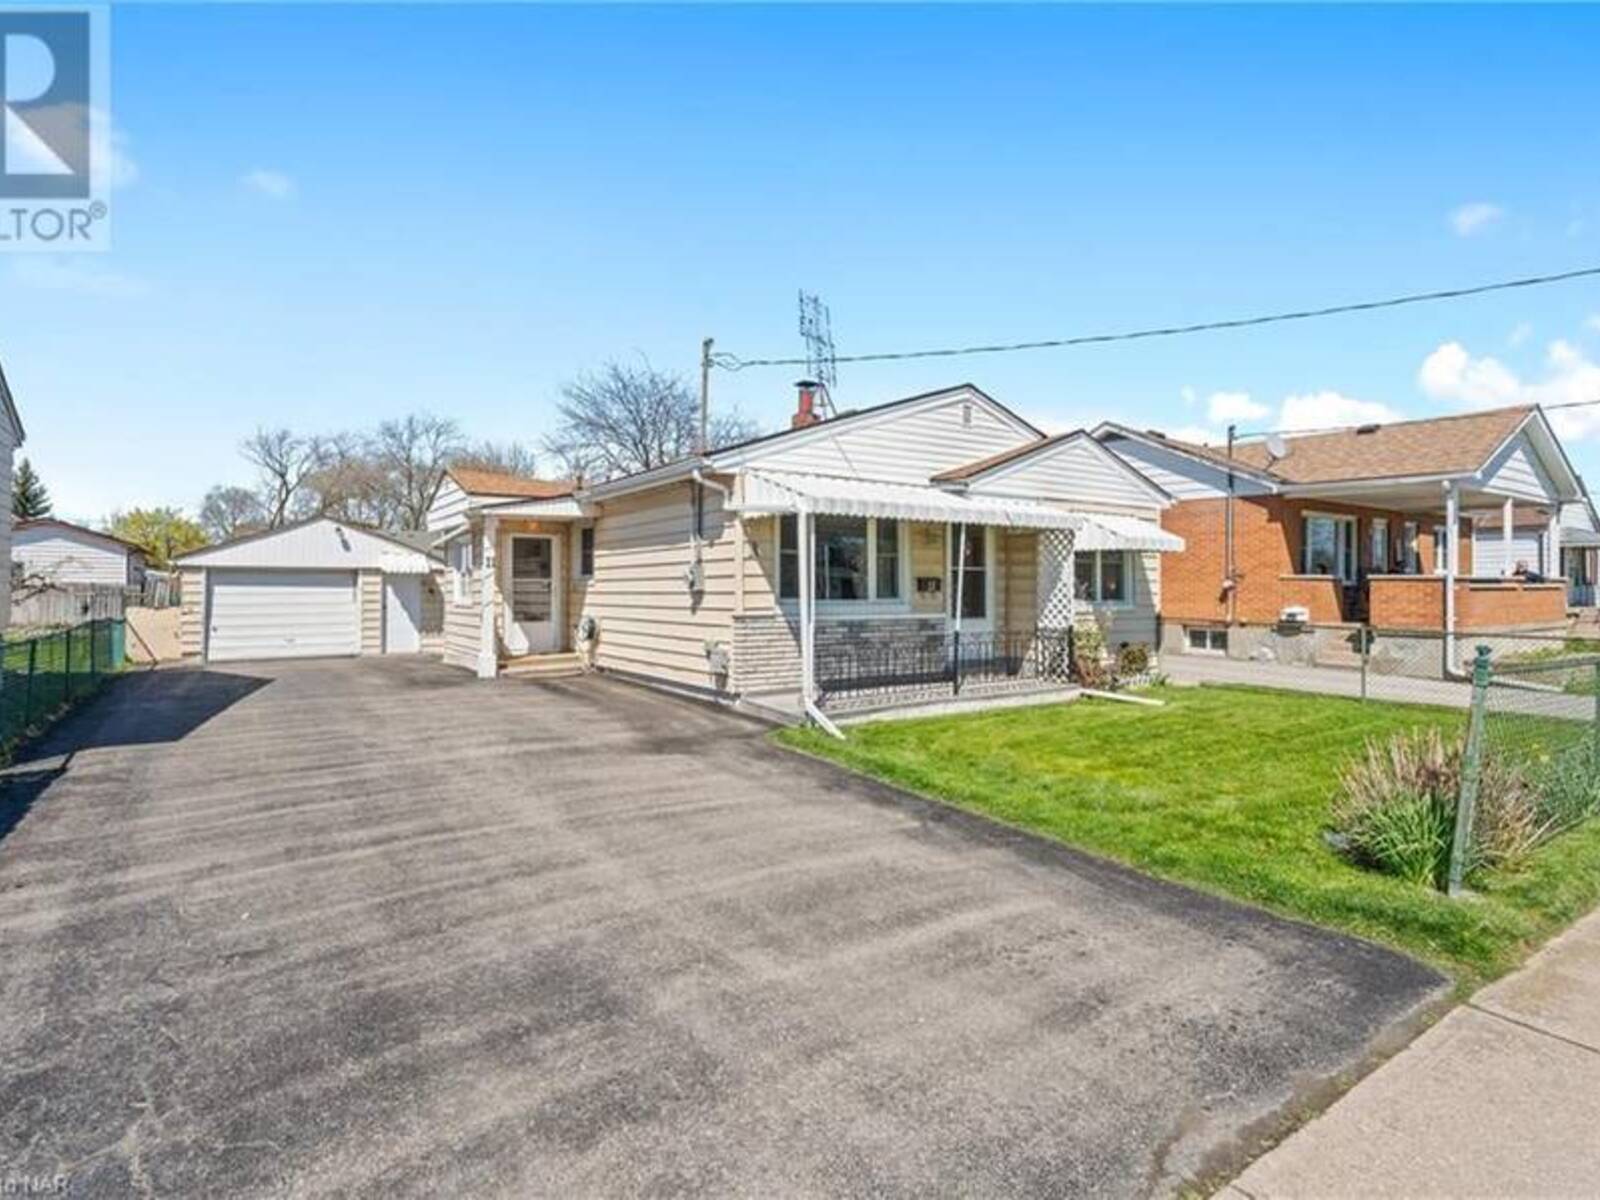 11 PARKWOOD Drive, St. Catharines, Ontario L2P 1H1